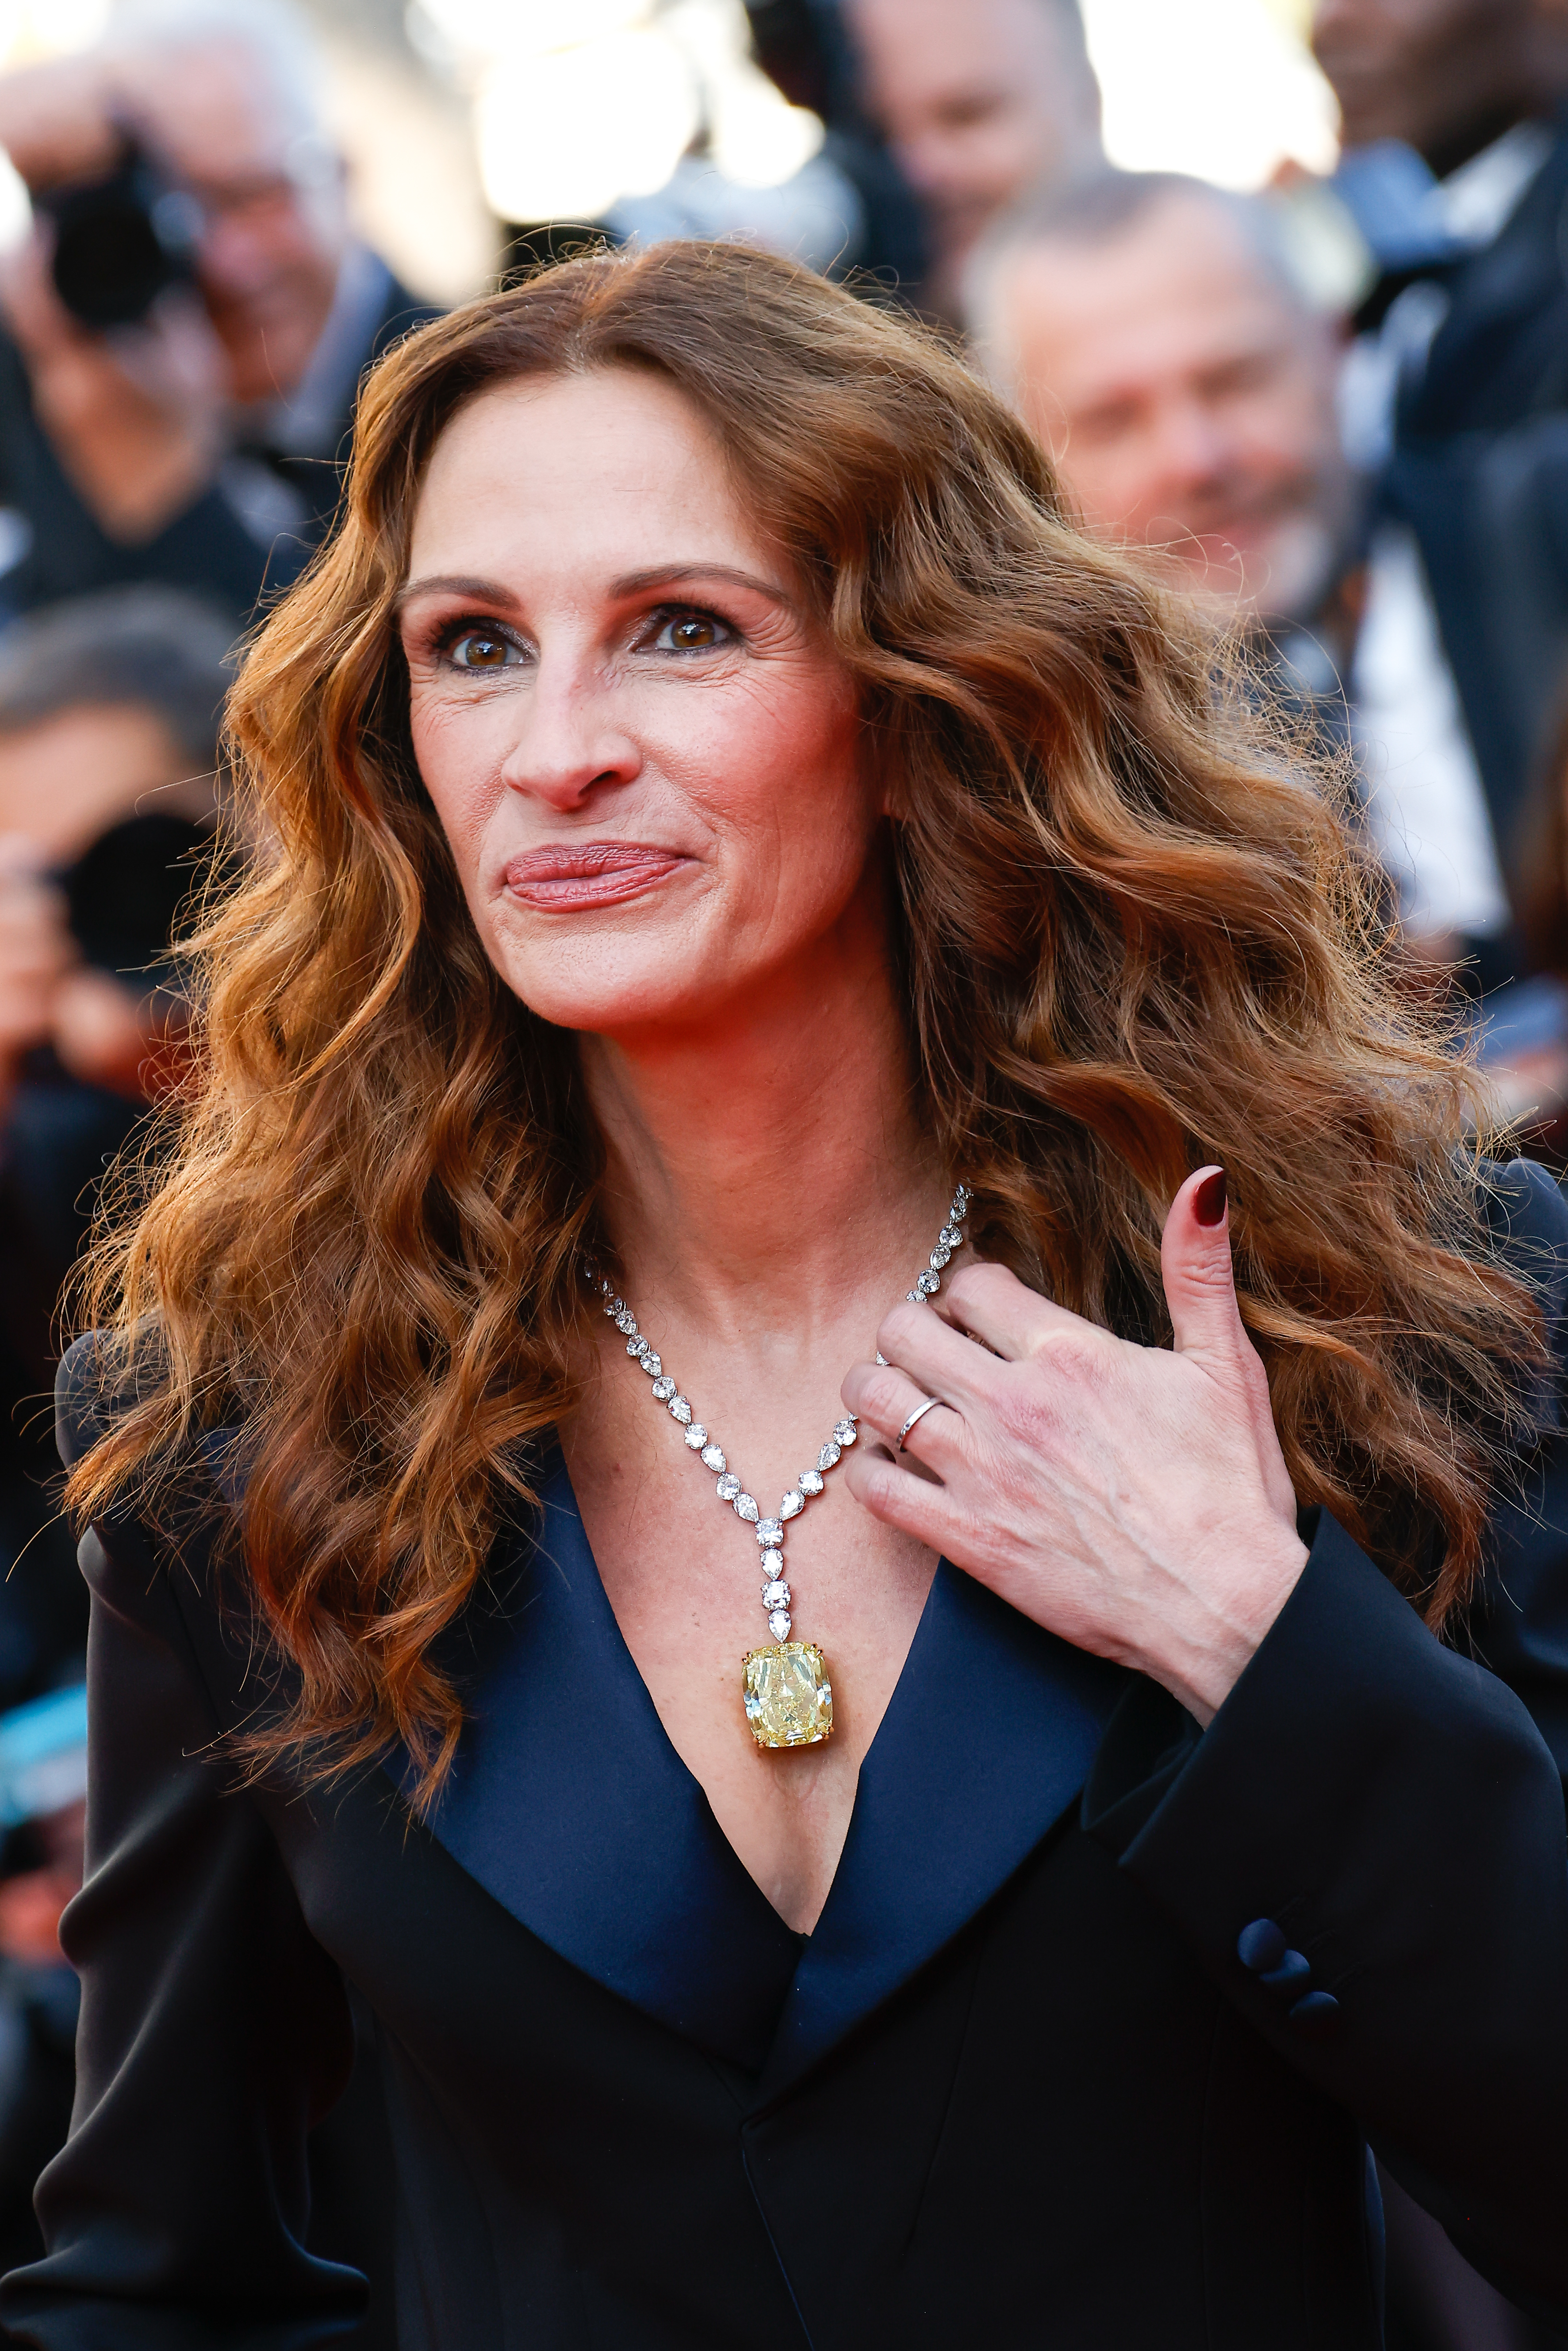 Julia Roberts at the screening of "Armageddon Time" during the 75th annual Cannes Film Festival, Palais des Festivals, Cannes, France, May 19, 2022 | Source: Getty Images